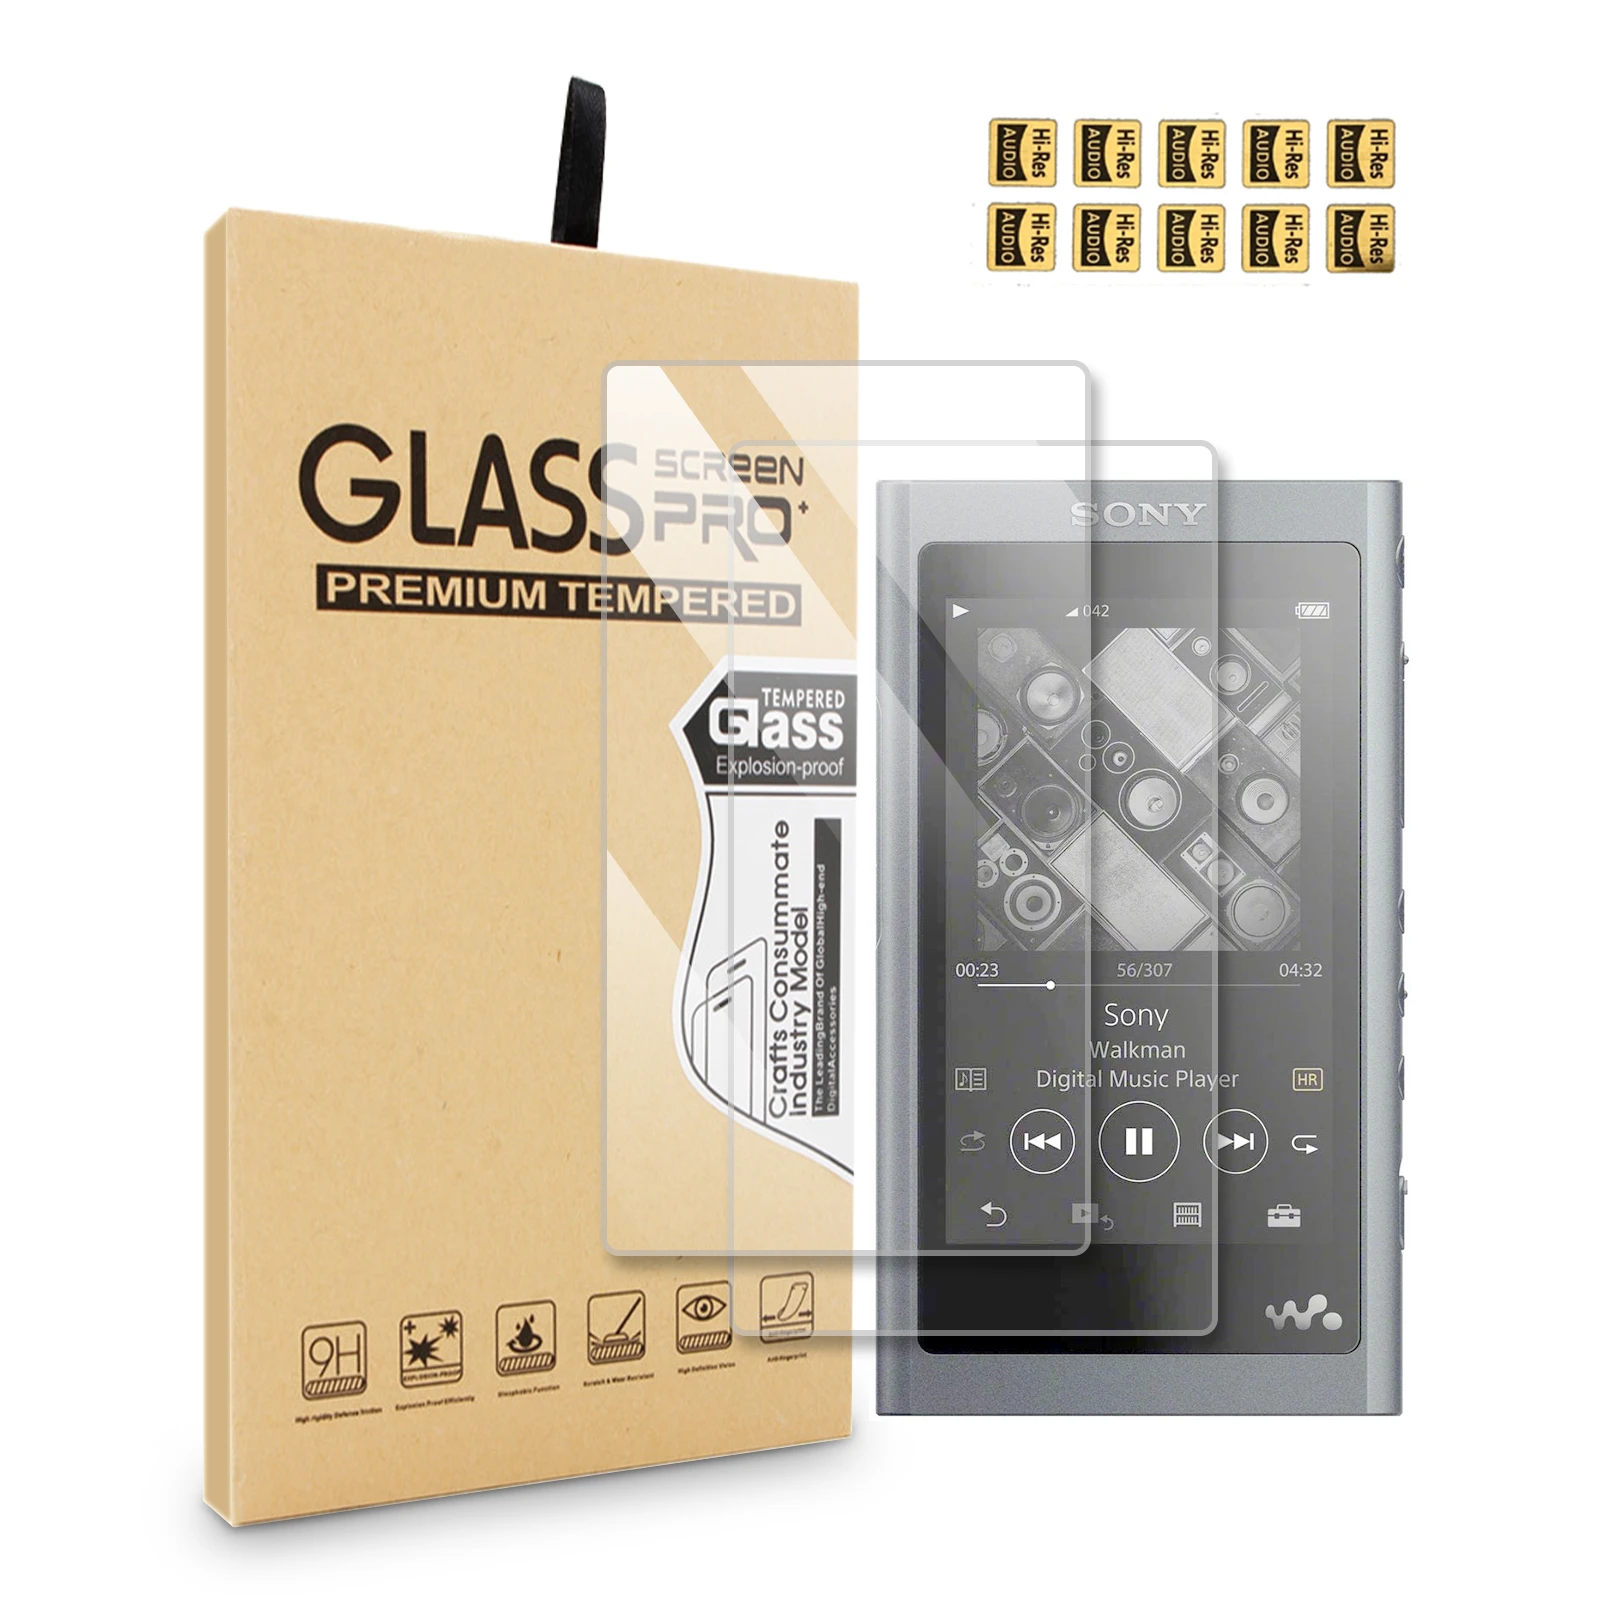 Bruni Screen Protector Compatible with Sony Walkman NW-WM1Z Protector Film Crystal Clear Protective Film 2X 